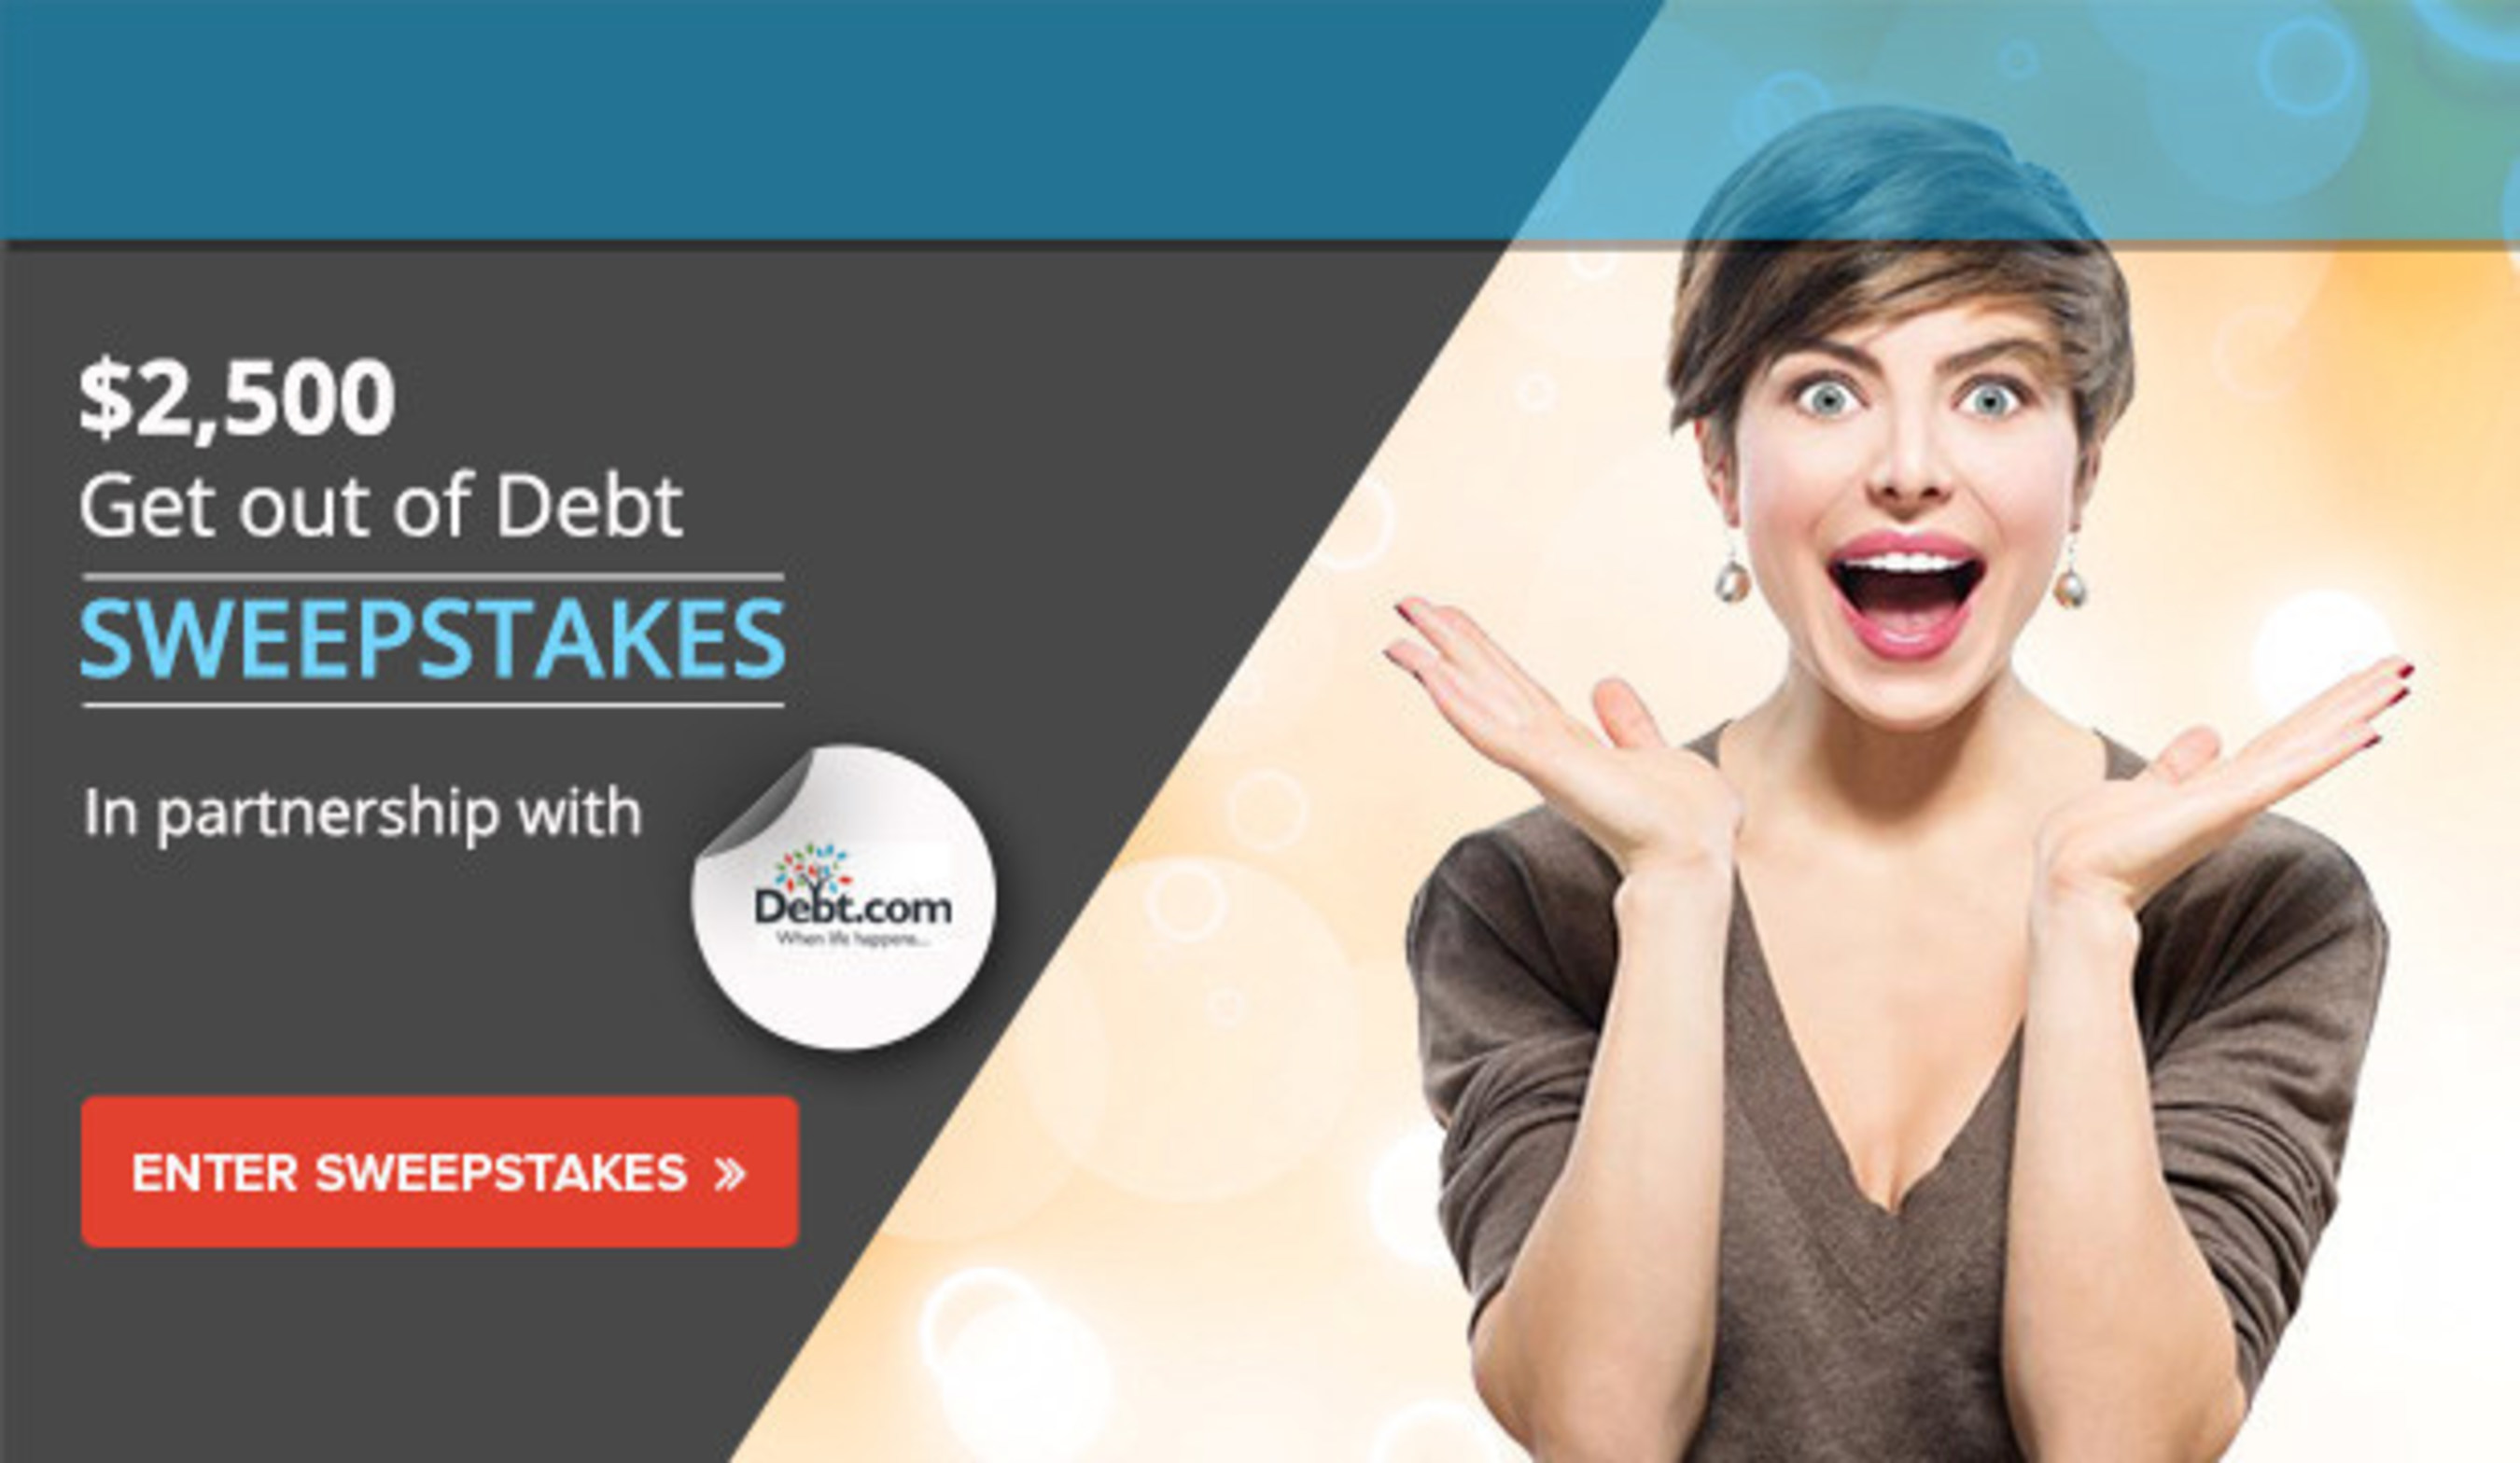 Debt.com's Get Out of Debt $2,500 Sweepstakes